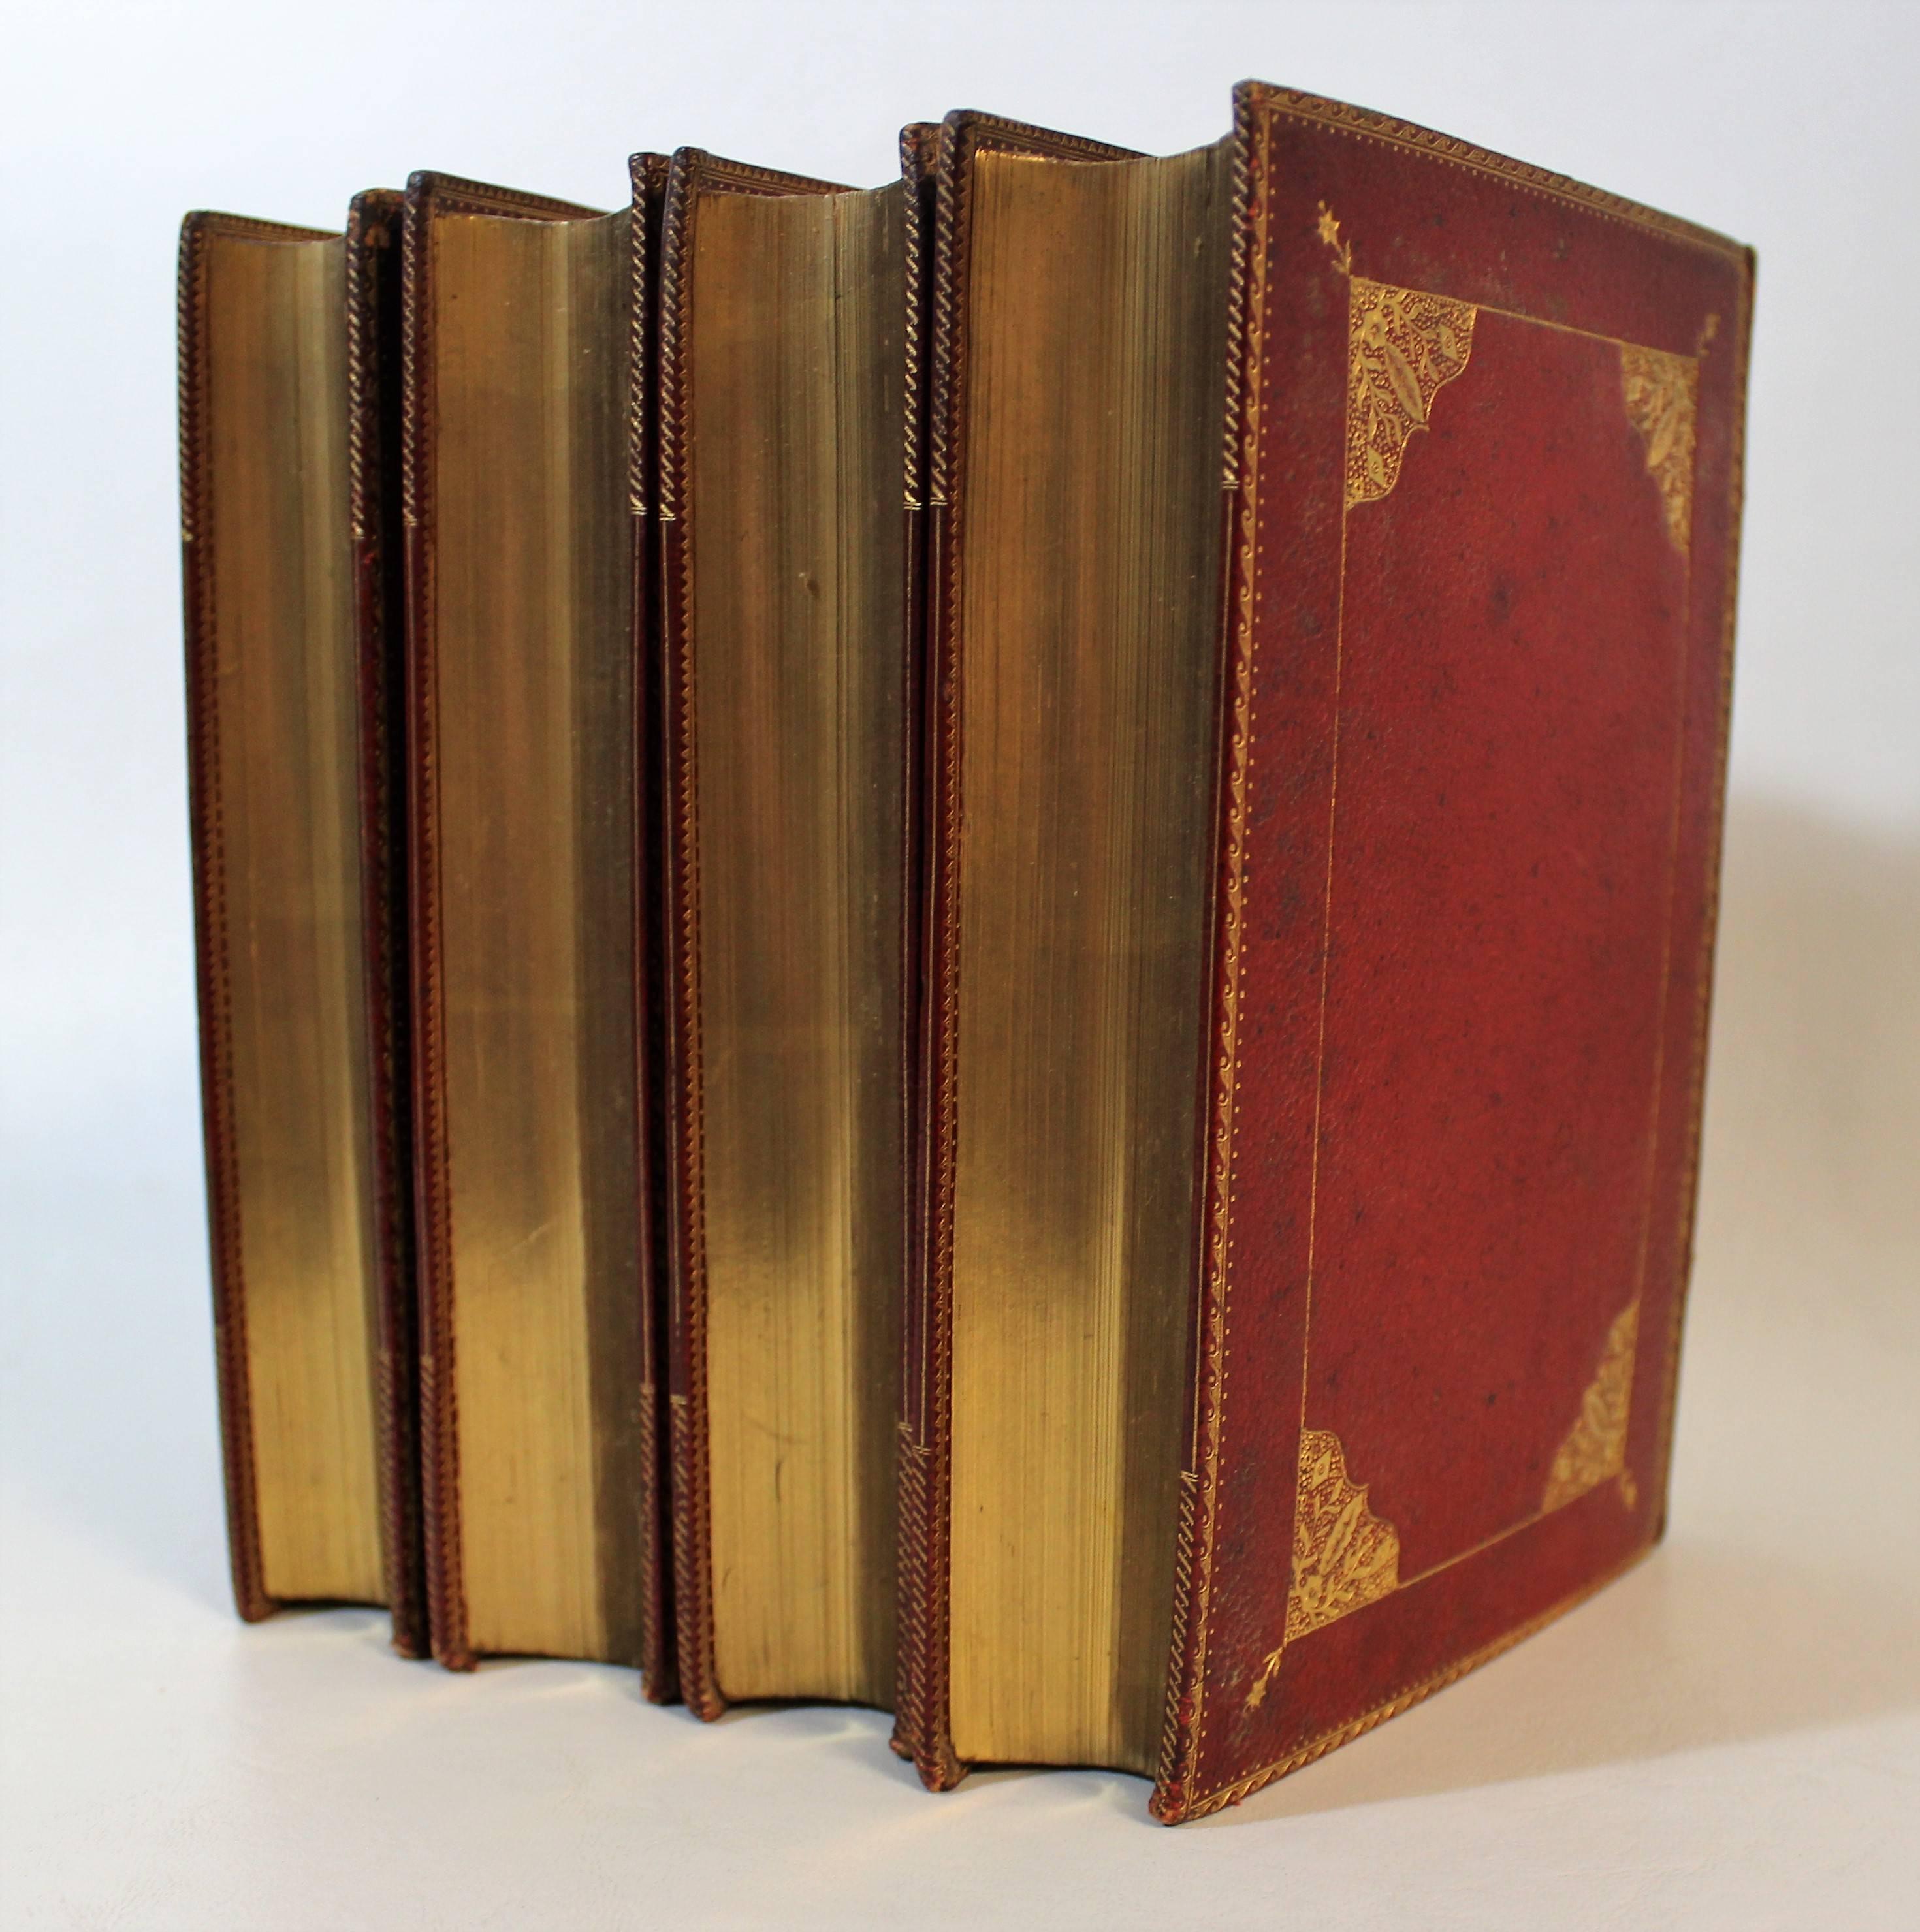 Middlemarch a study of provincial life by George Eliot Vol 1-4. First edition.
William blackwood and sons, 1872.